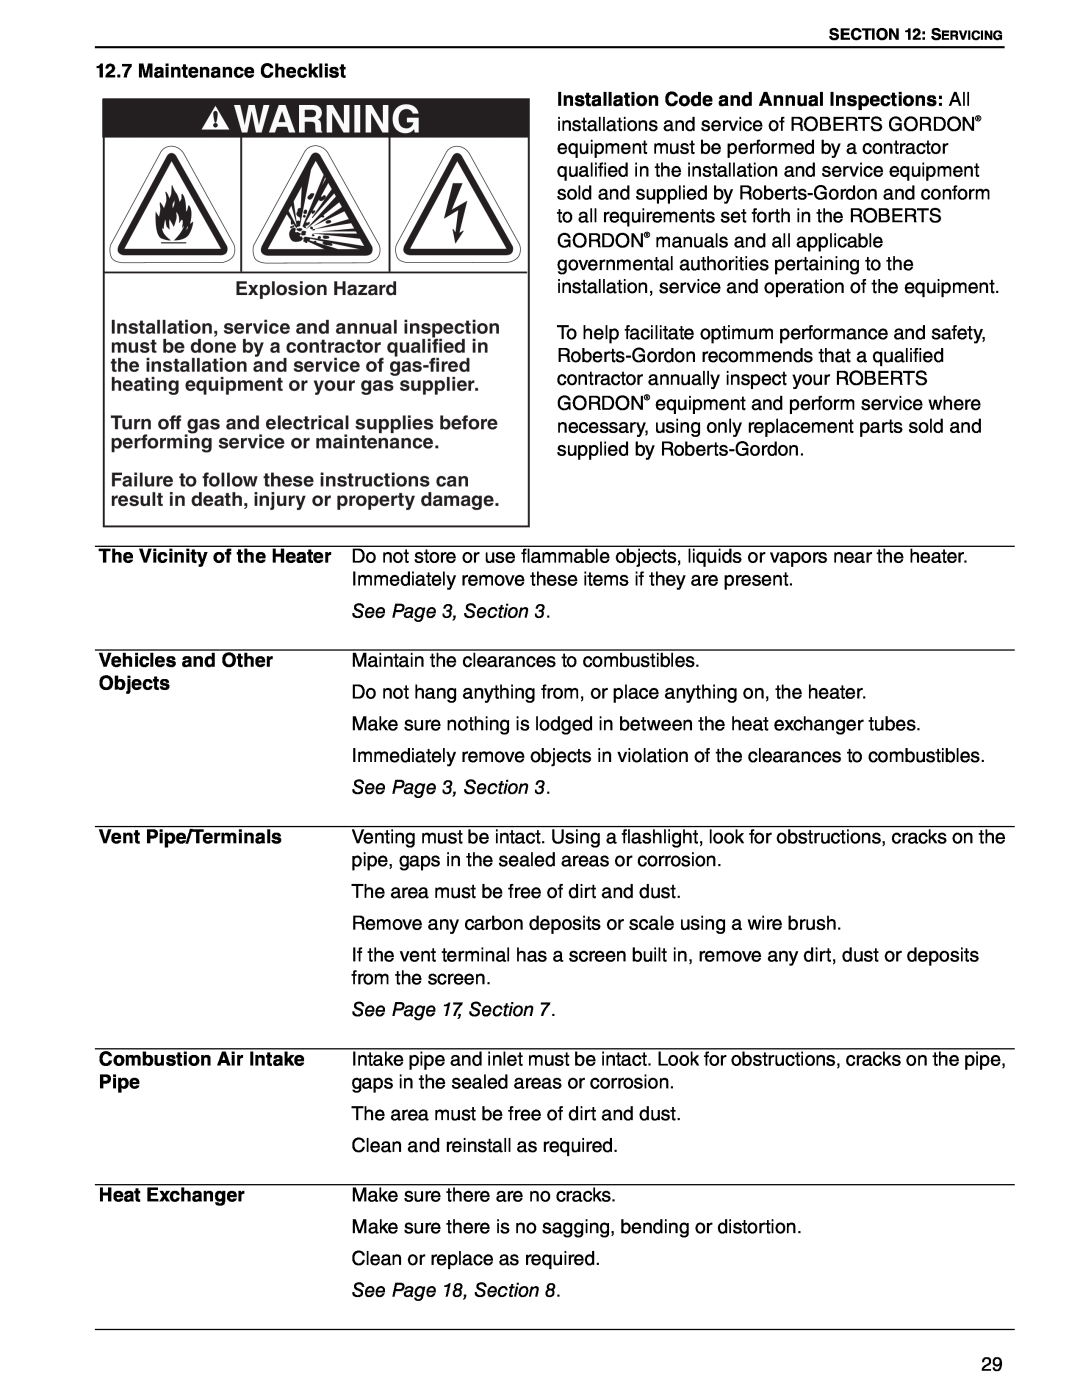 Roberts Gorden UHD[X][S][R] 125 Maintenance Checklist, The Vicinity of the Heater, See Page 3, Section, Vehicles and Other 